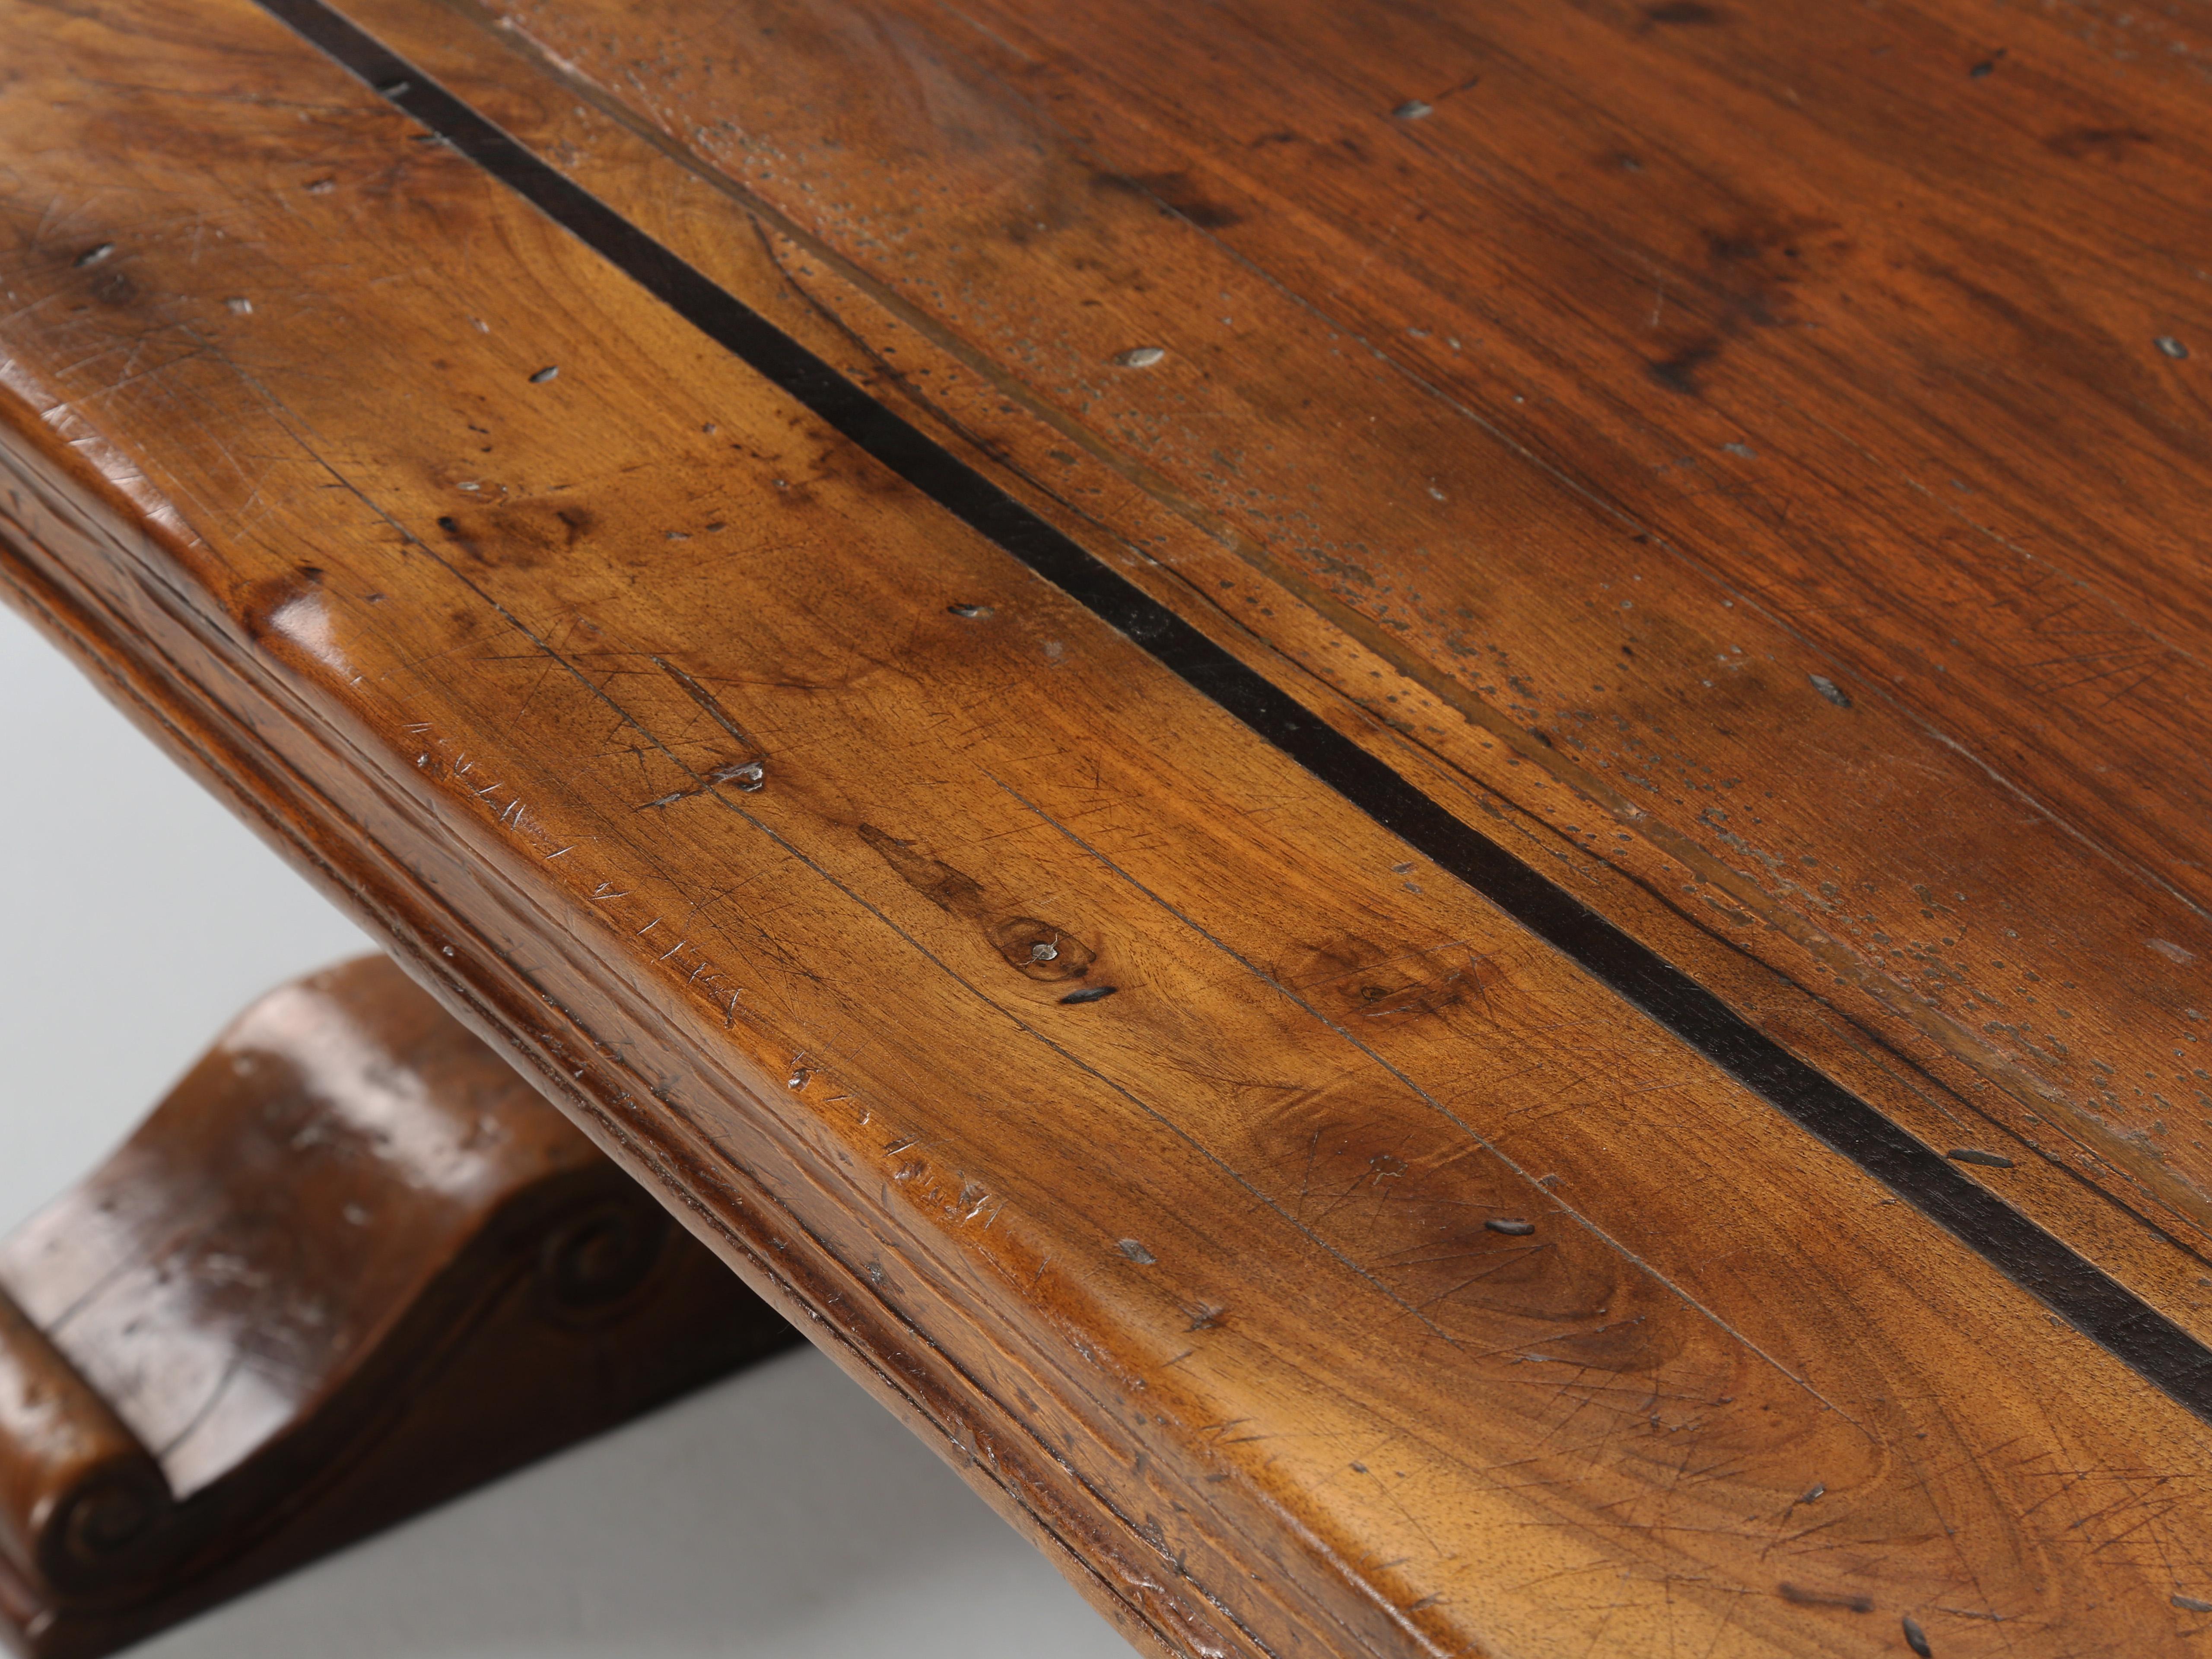 Hand-Carved Vintage French Solid Walnut Trestle Style Dining Table Made by Quinta, Perpignan